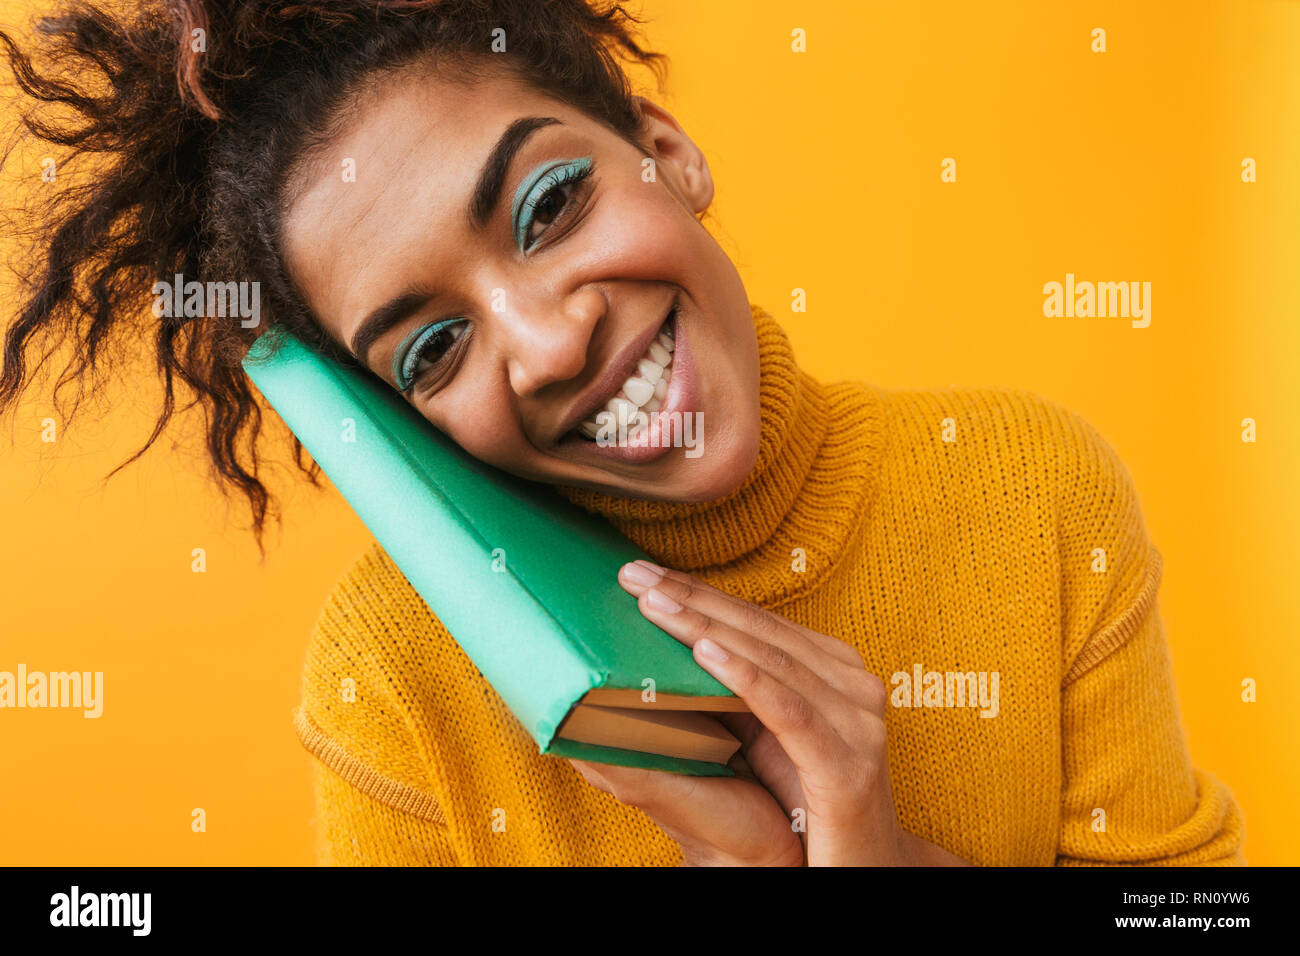 Cheerful african woman wearing sweater holding a book isolated over yellow background Stock Photo